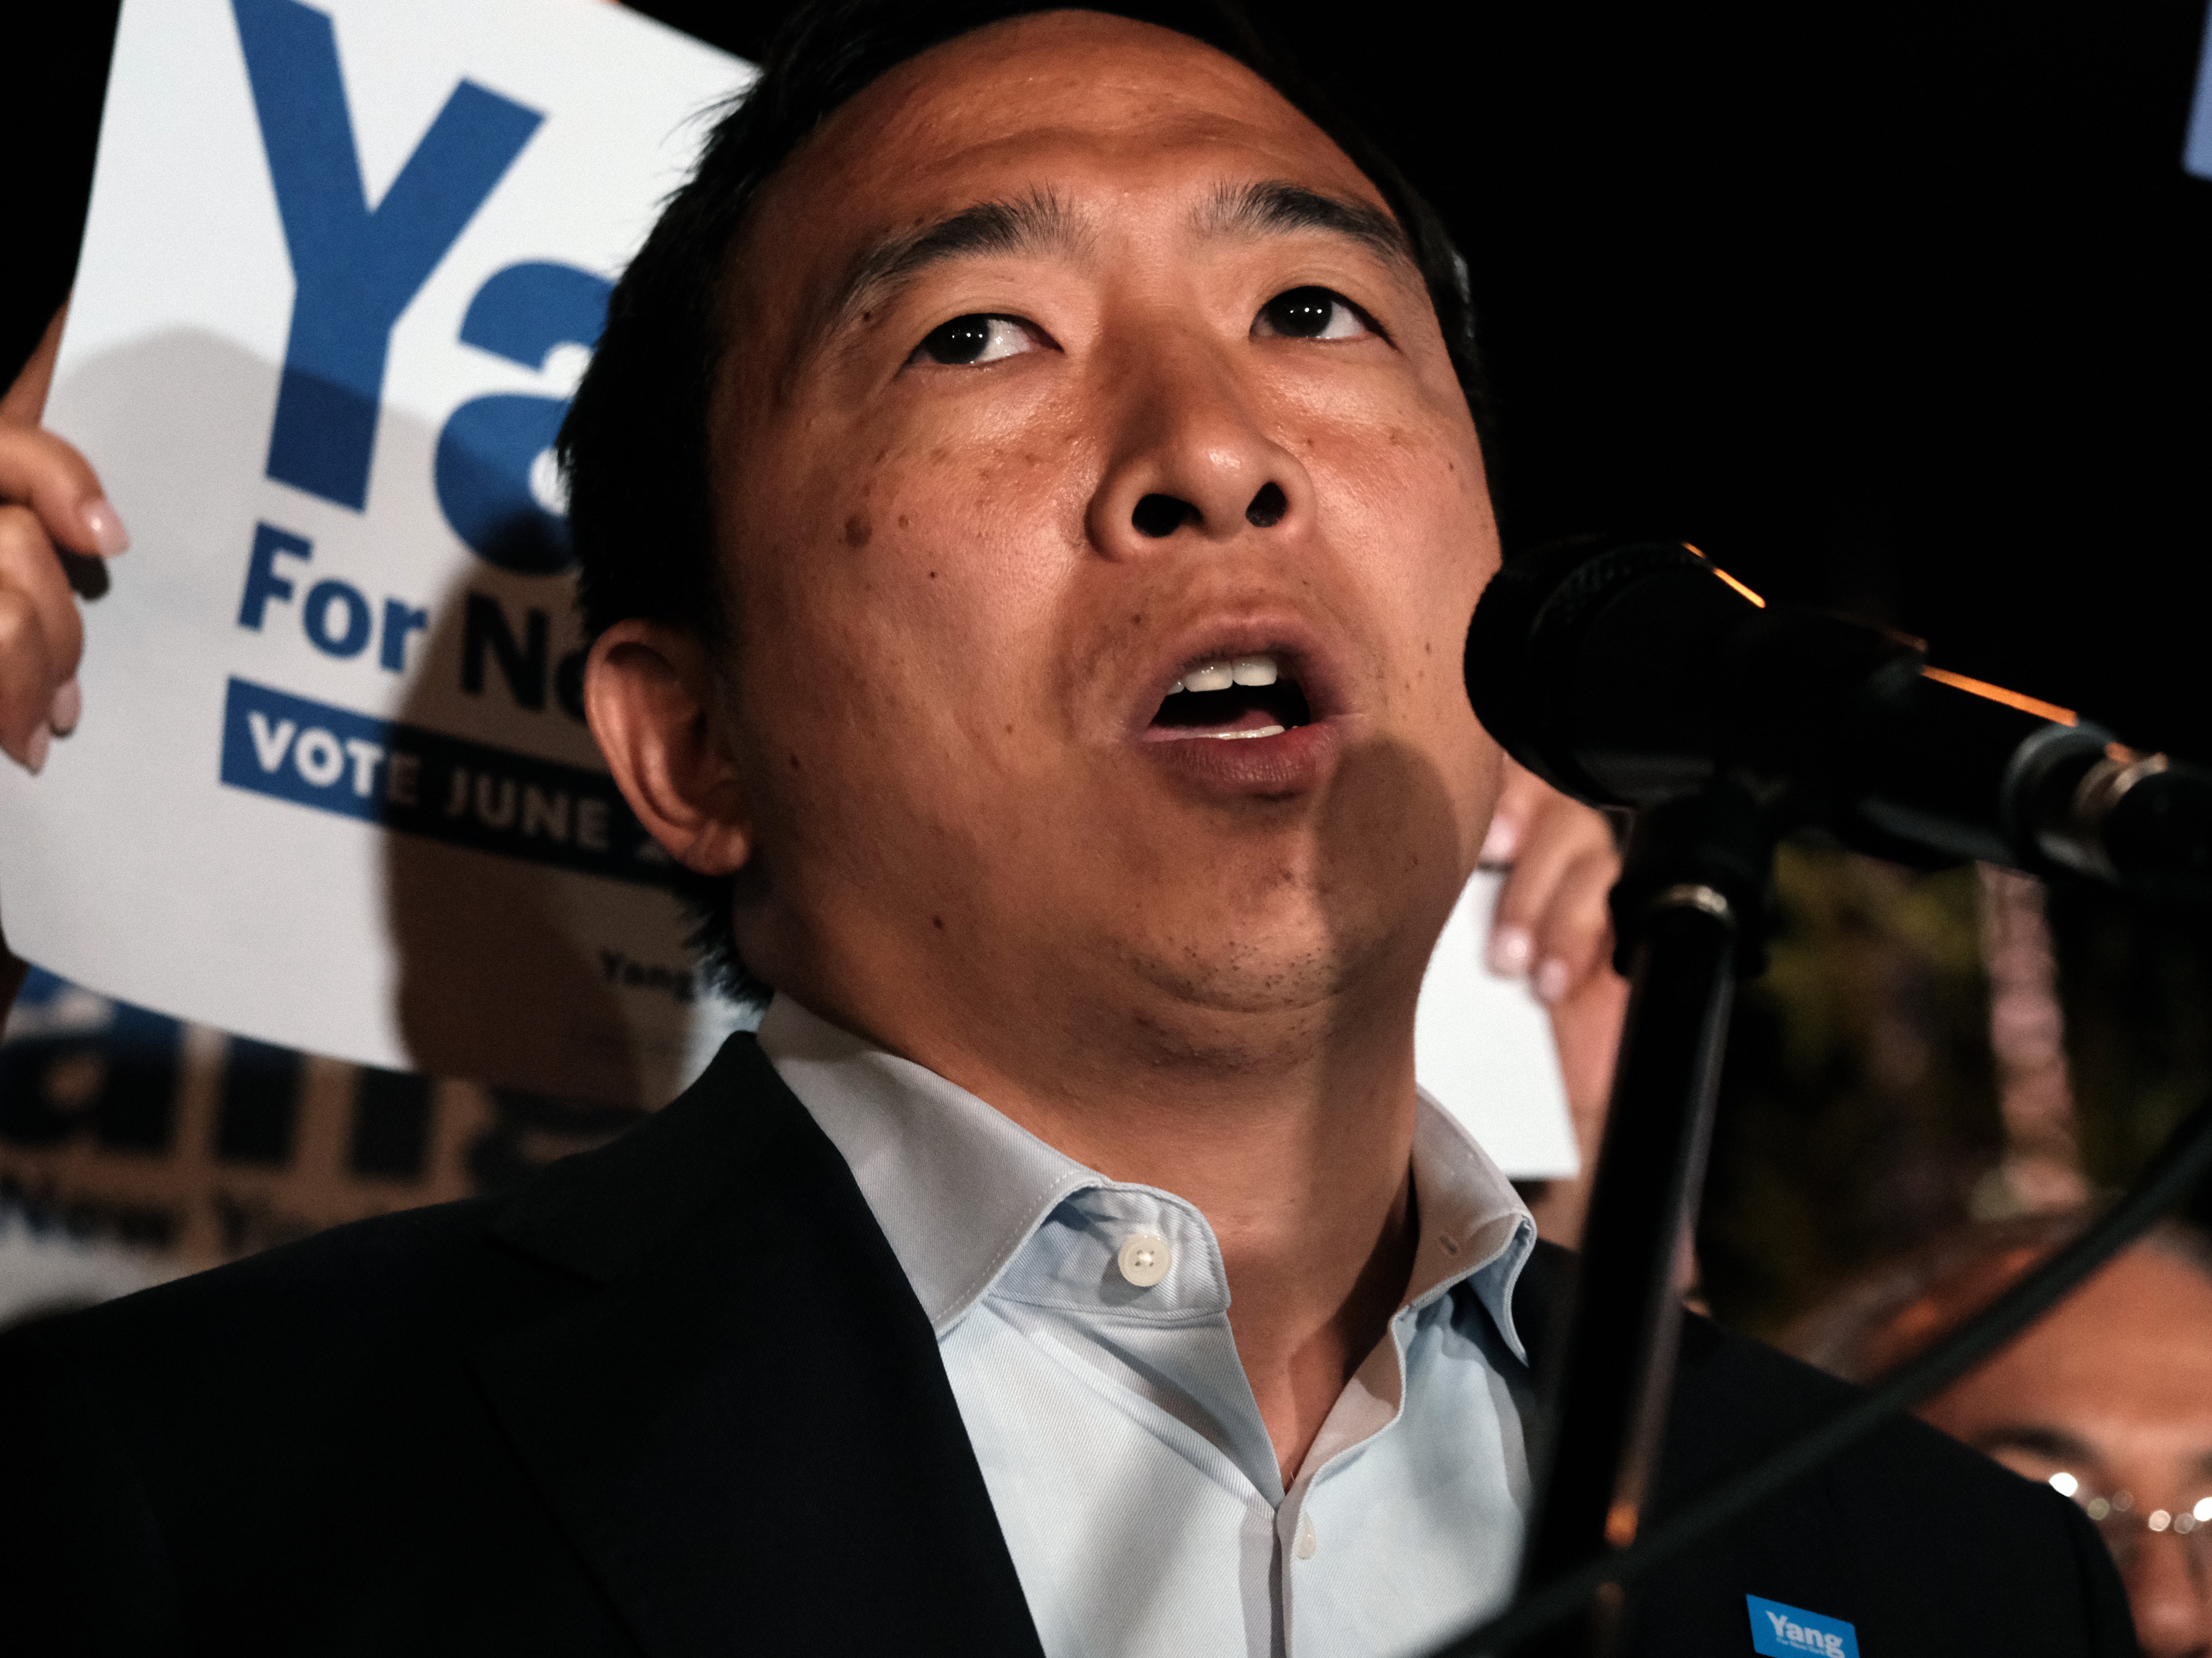 Andrew Yang was placed fourth, despite having the largest social media footprint